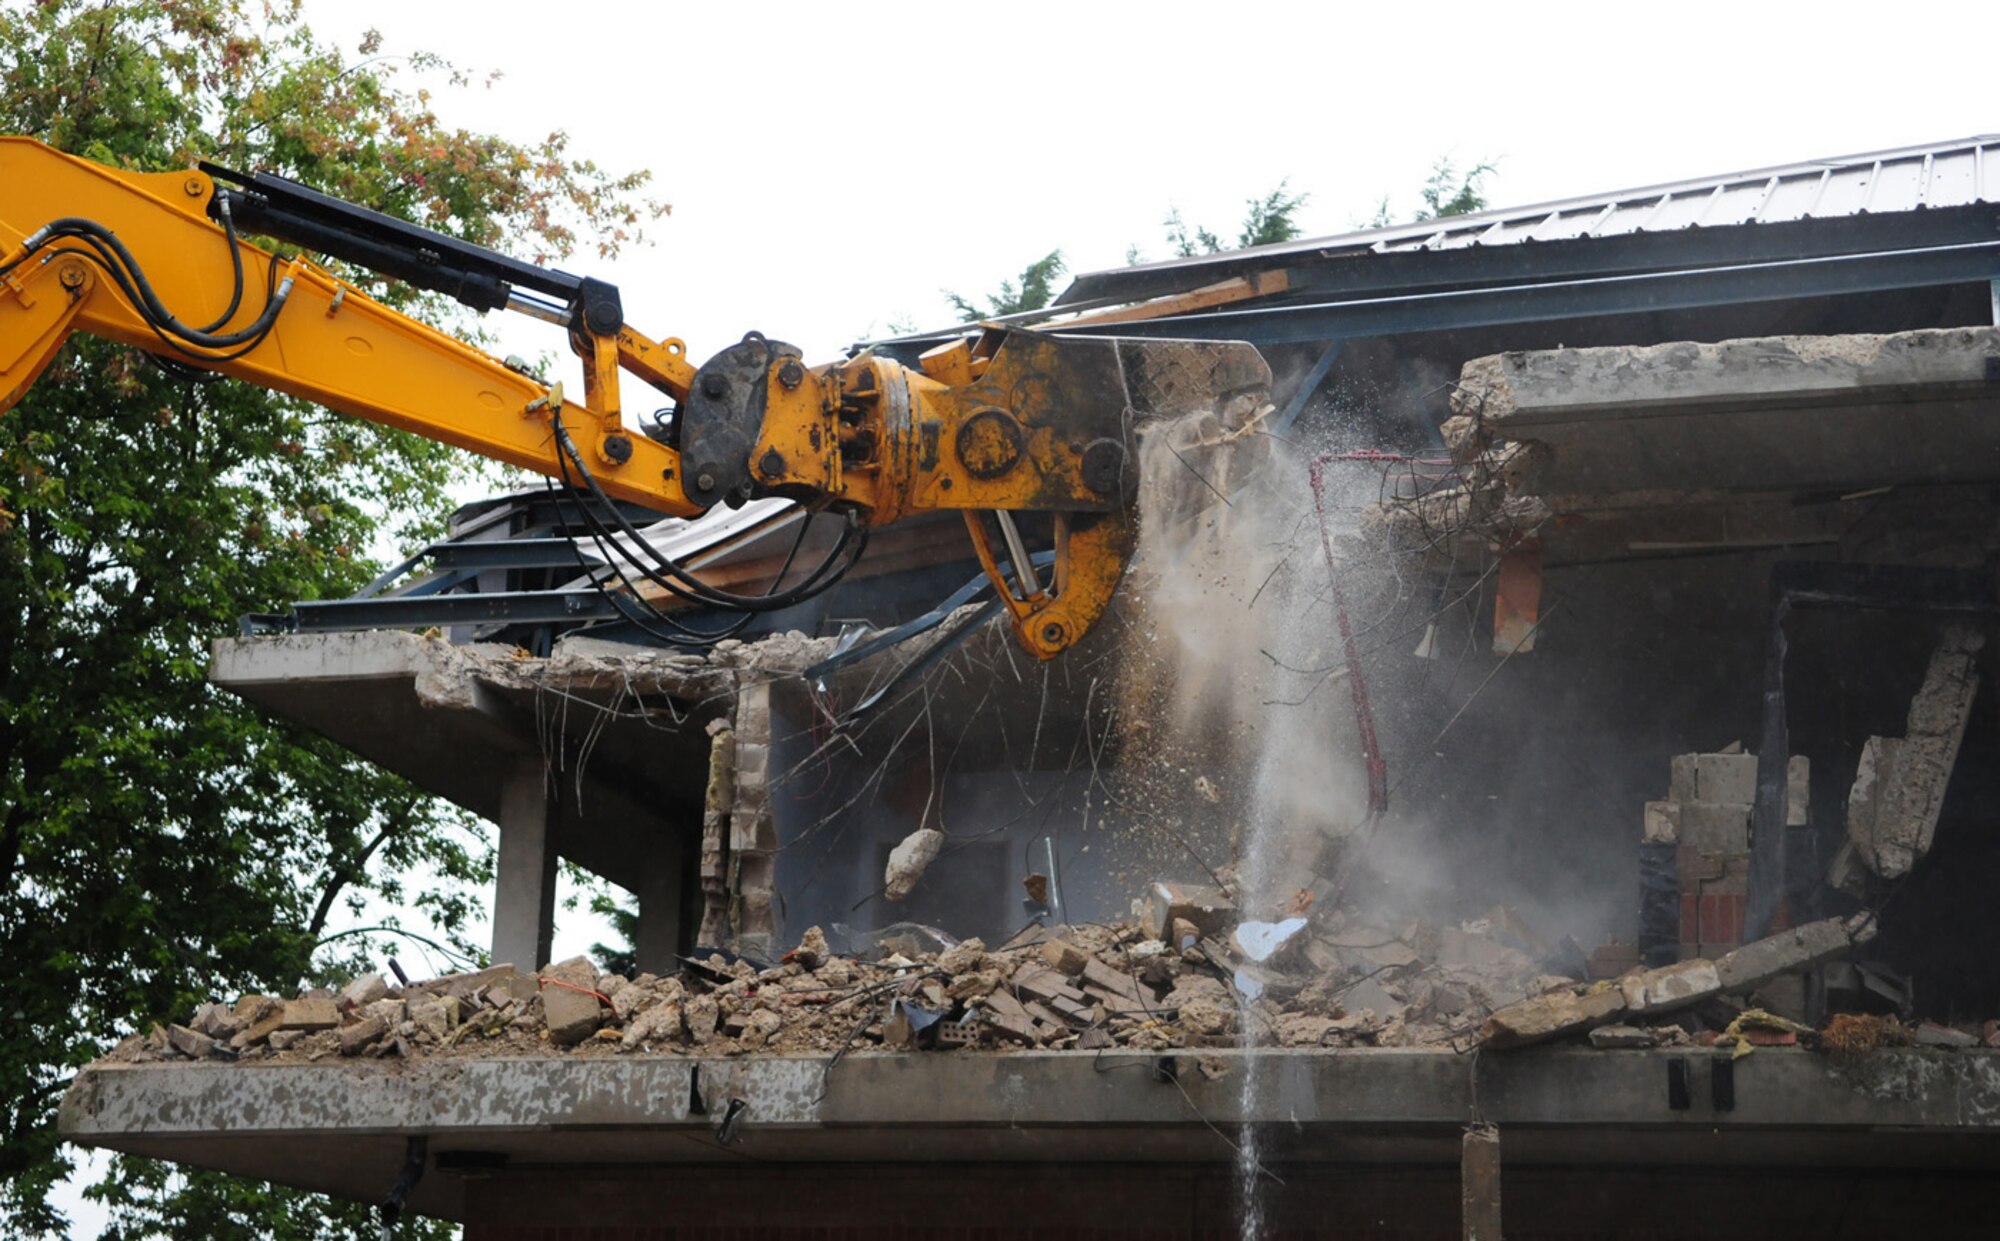 RAF MILDENHALL, England -- Like a dinosaur munching down food, a mechanical digger rips apart Dorm 212 as part of an ongoing demolition project. The quality of the Airmen's quarters had deteriorated and had become surplus to requirements. Once demolition is complete, which is scheduled for January 2011, the area will be landscaped. (U.S. Air Force photo/Karen Abeyasekere)